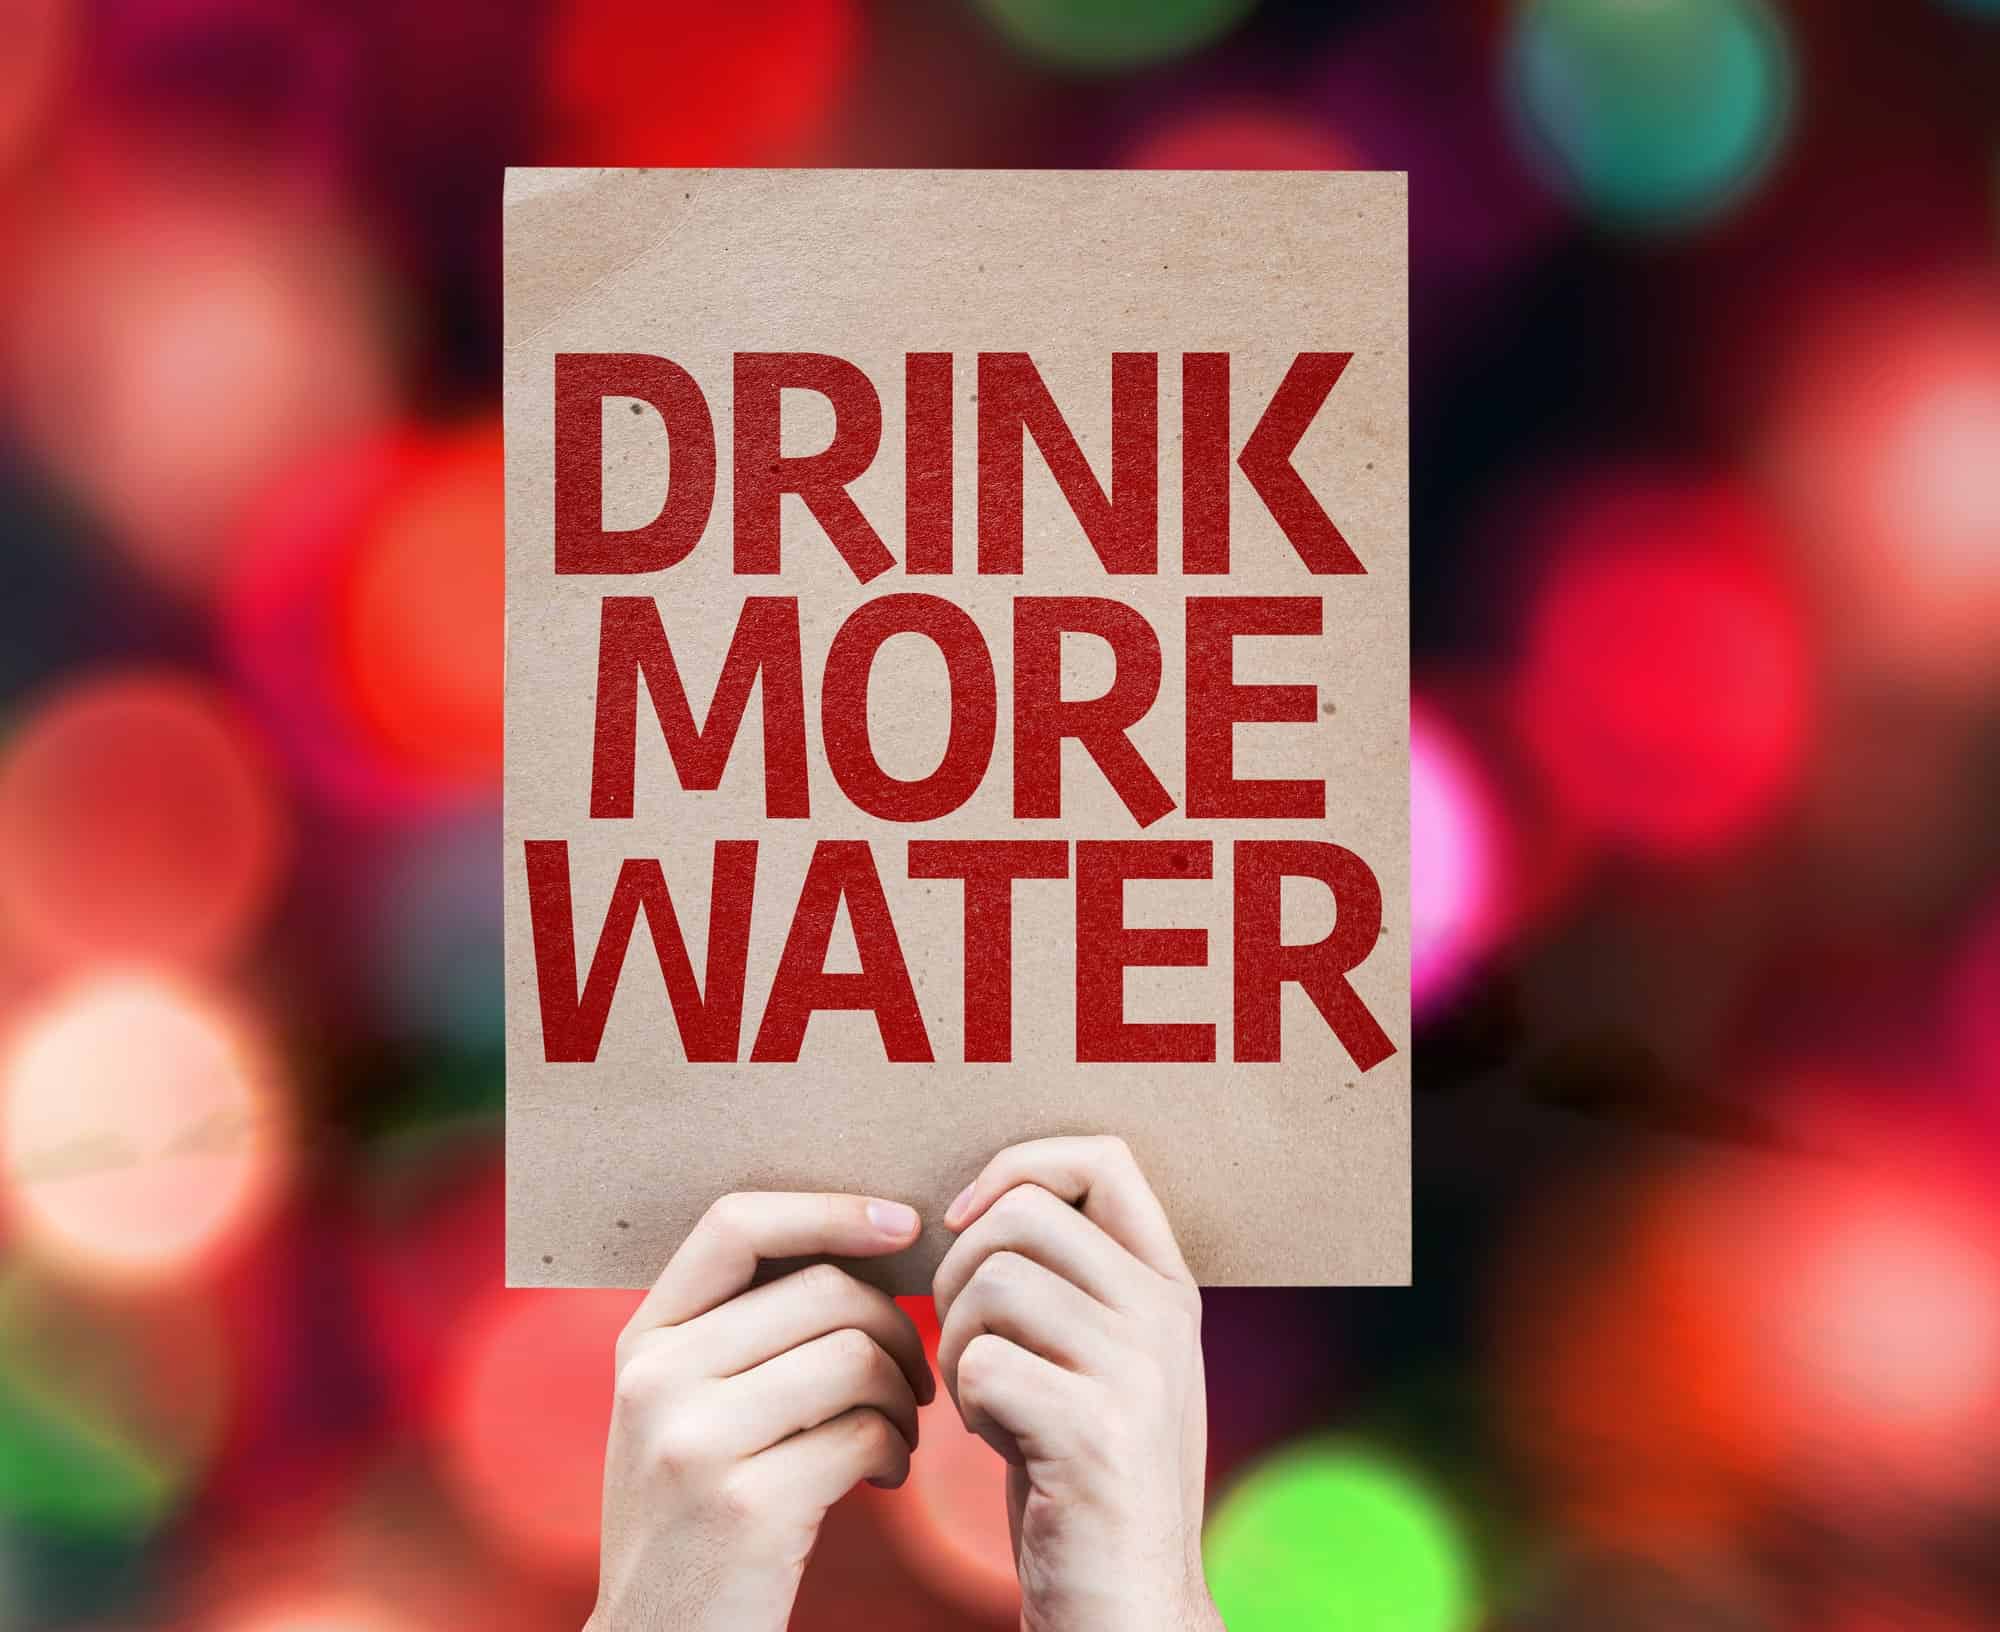 Drink more water sign red